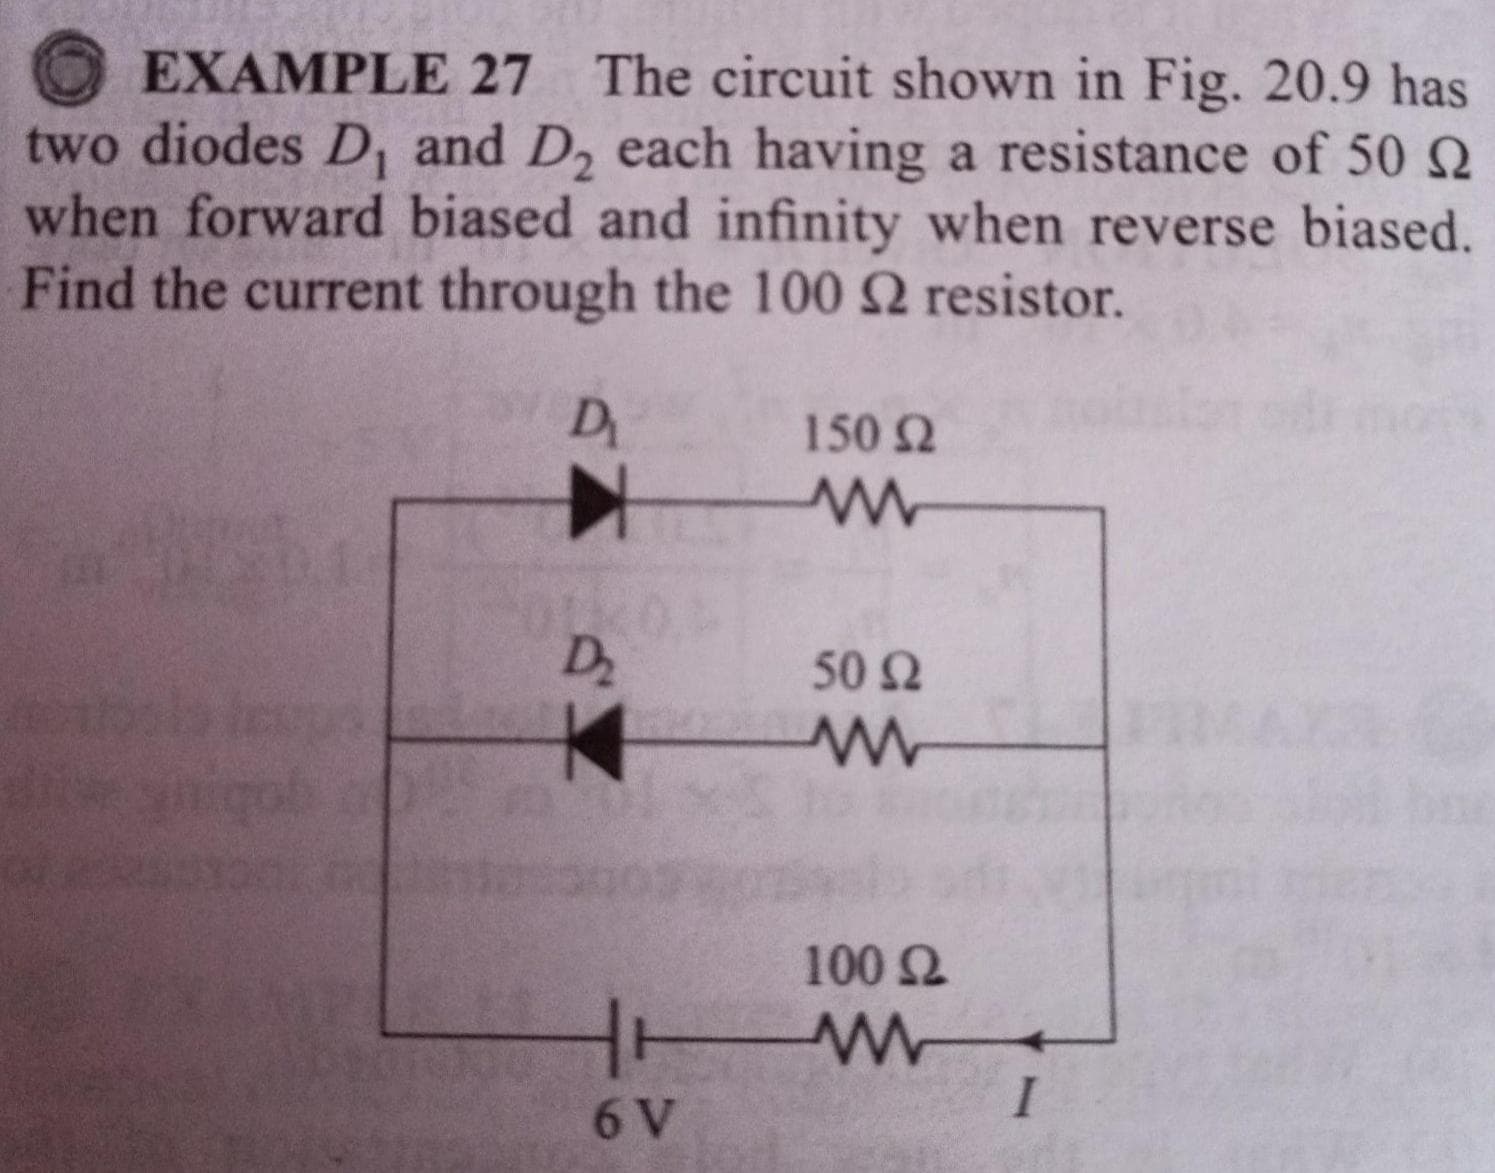 EXAMPLE 27 The circuit shown in Fig. 20.9 has
two diodes D, and D, each having a resistance of 50
when forward biased and infinity when reverse biased.
Find the current through the 100 2 resistor.
D
150 2
Dz
50 Ω
gobauk
100 2
6 V
